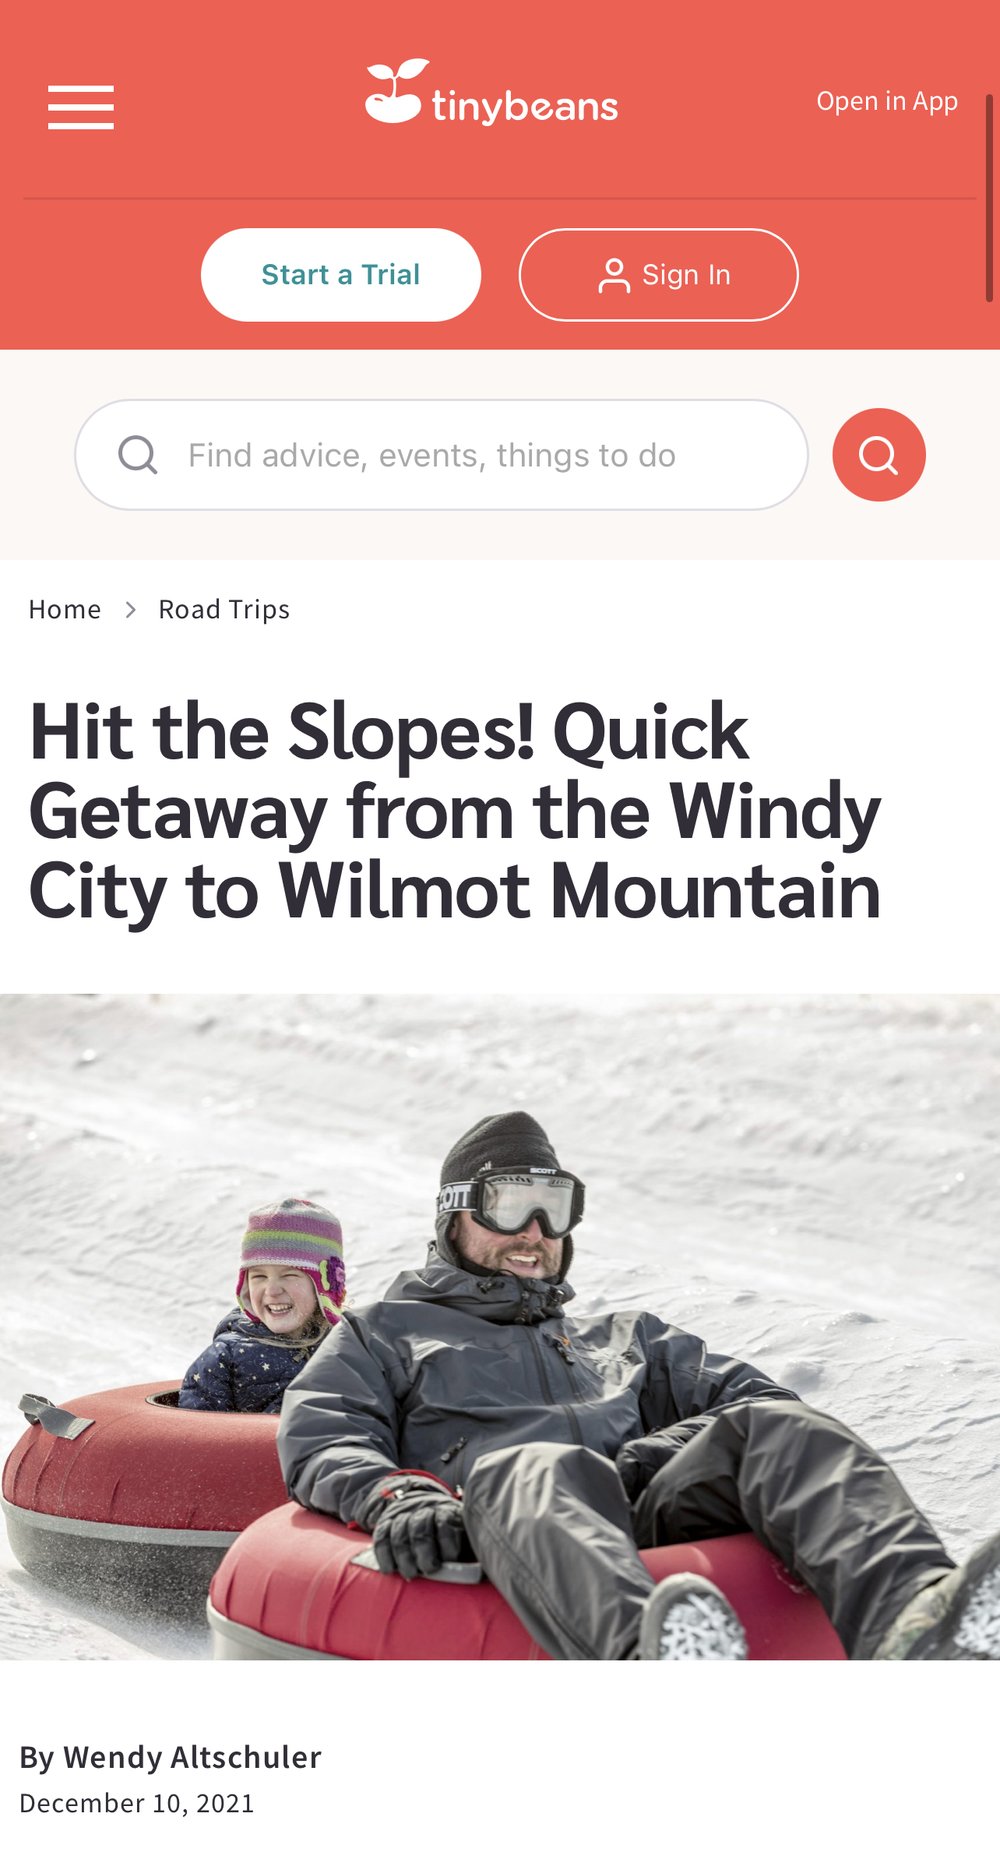 Hit the Slopes! Quick Getaway from the Windy City to Wilmot Mountain